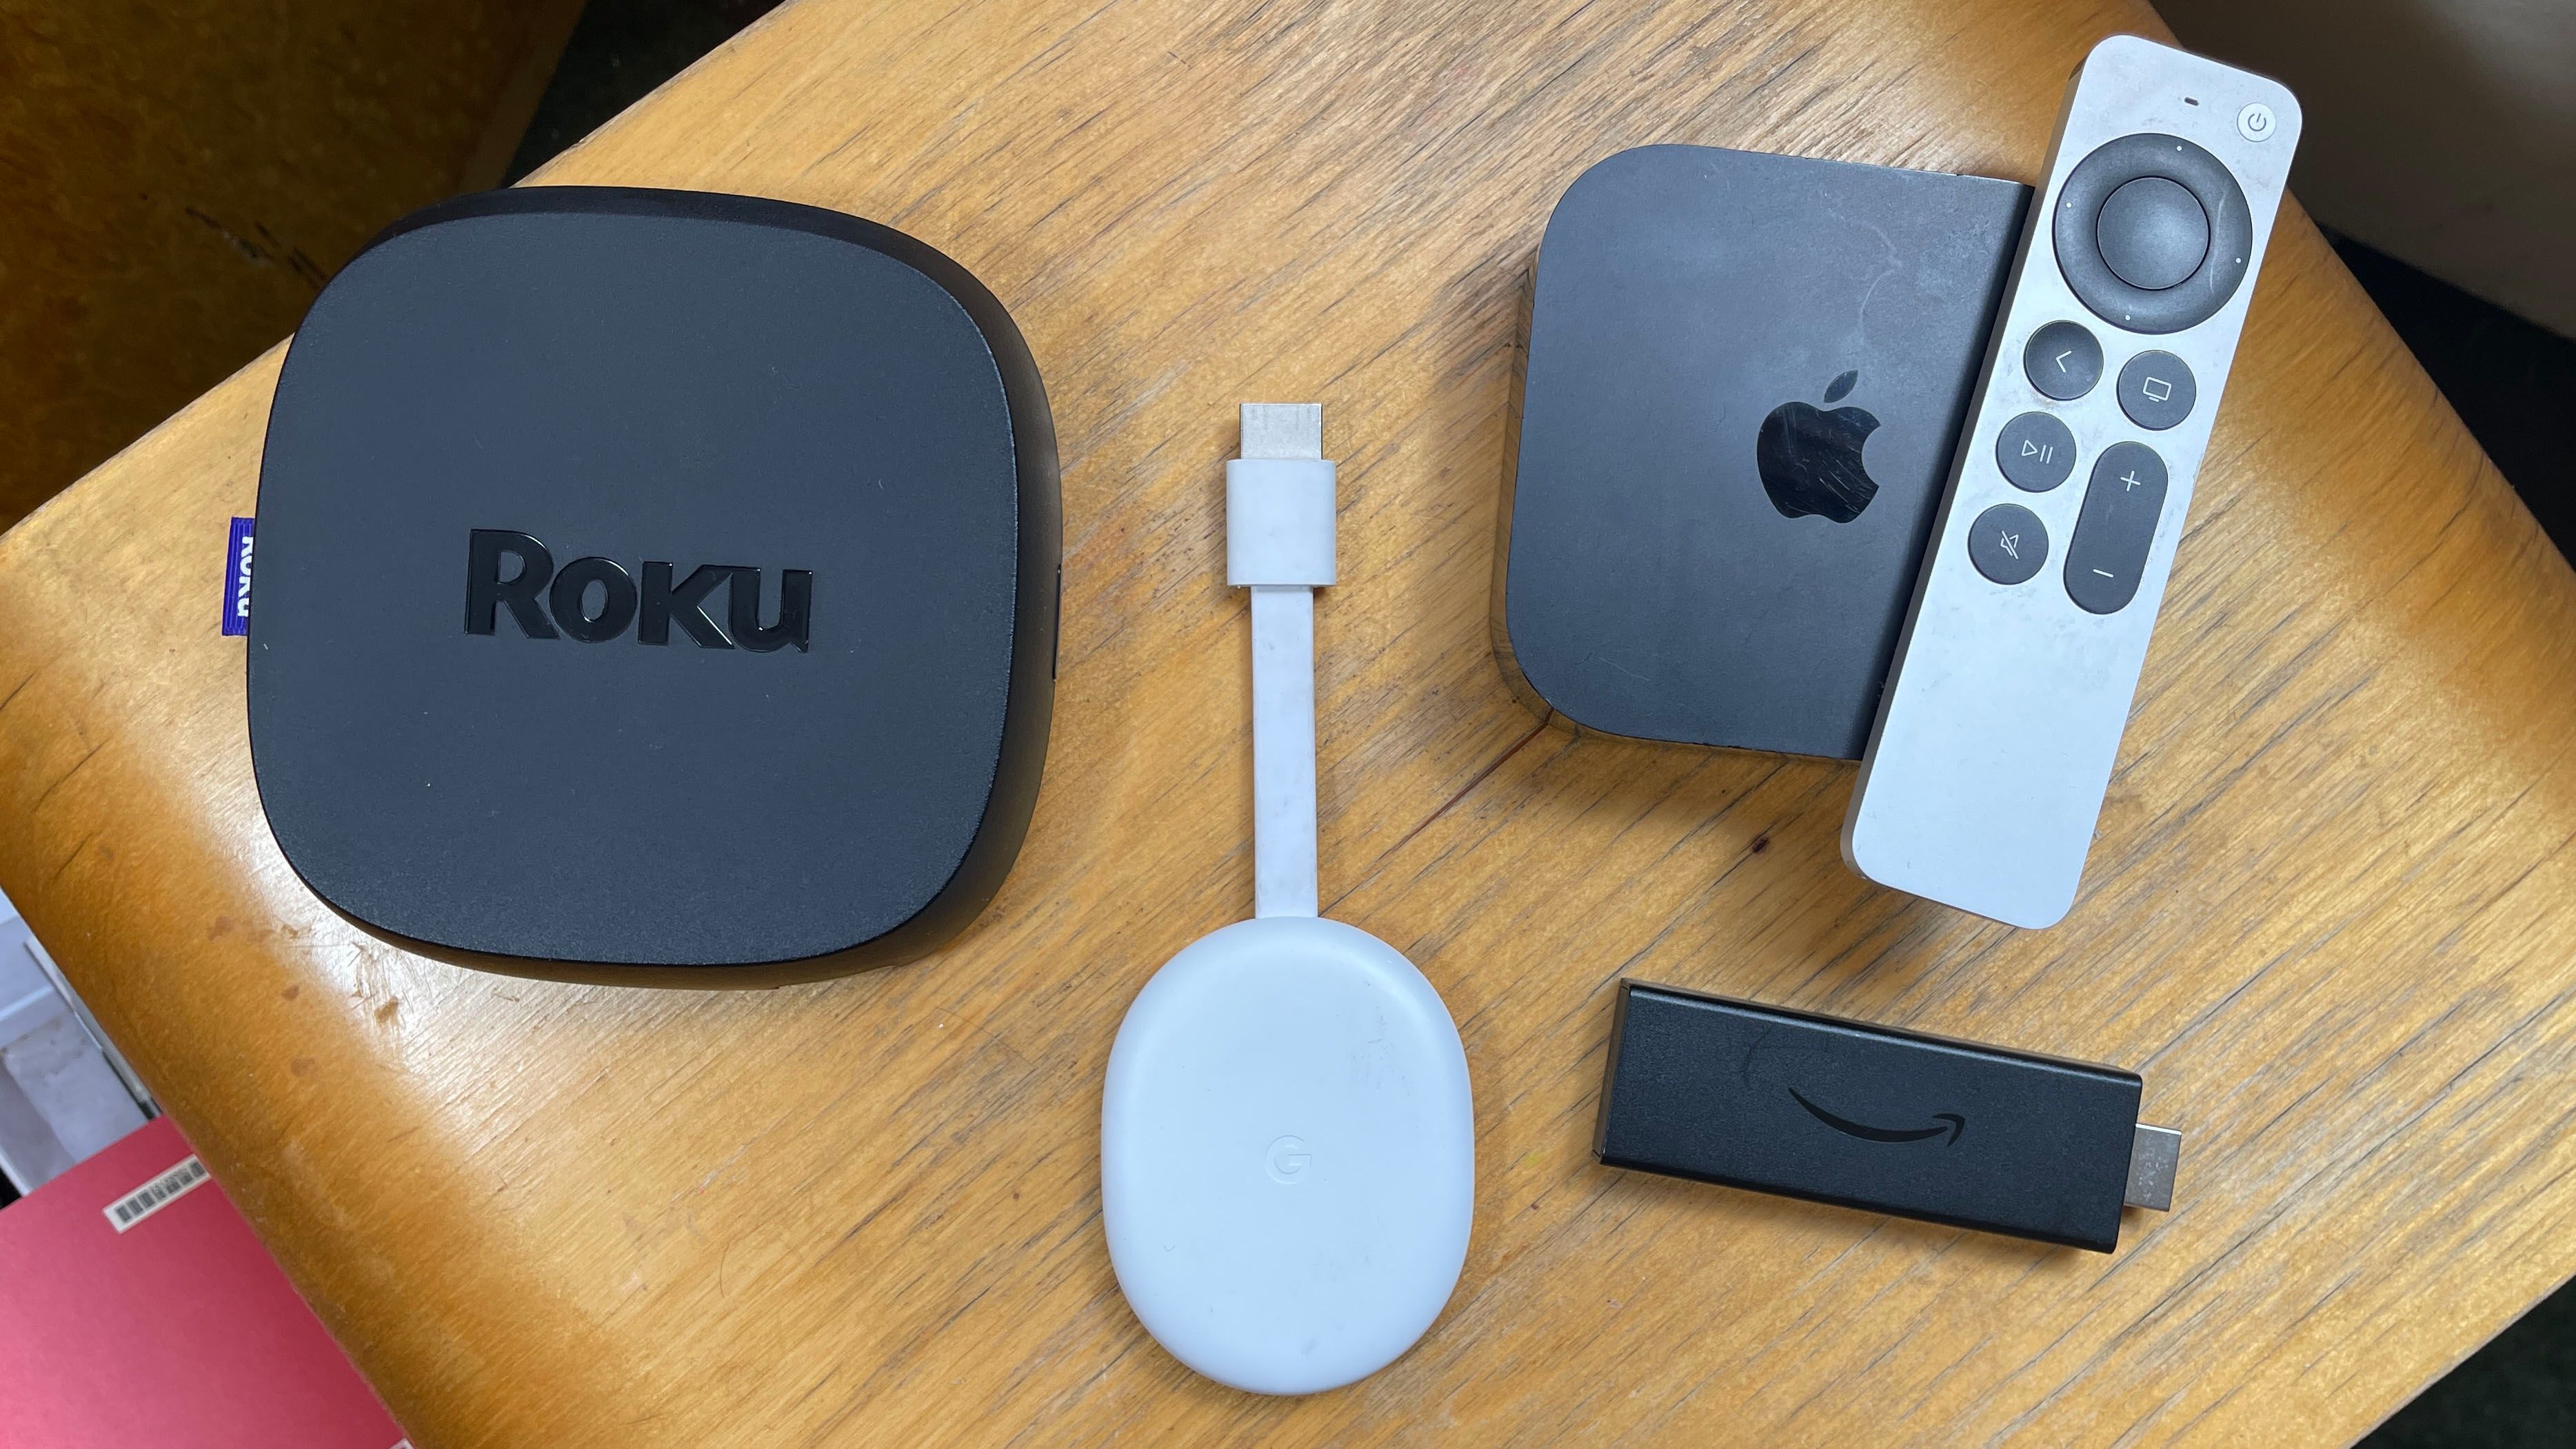 How to stream NFL games without cable on Roku devices 